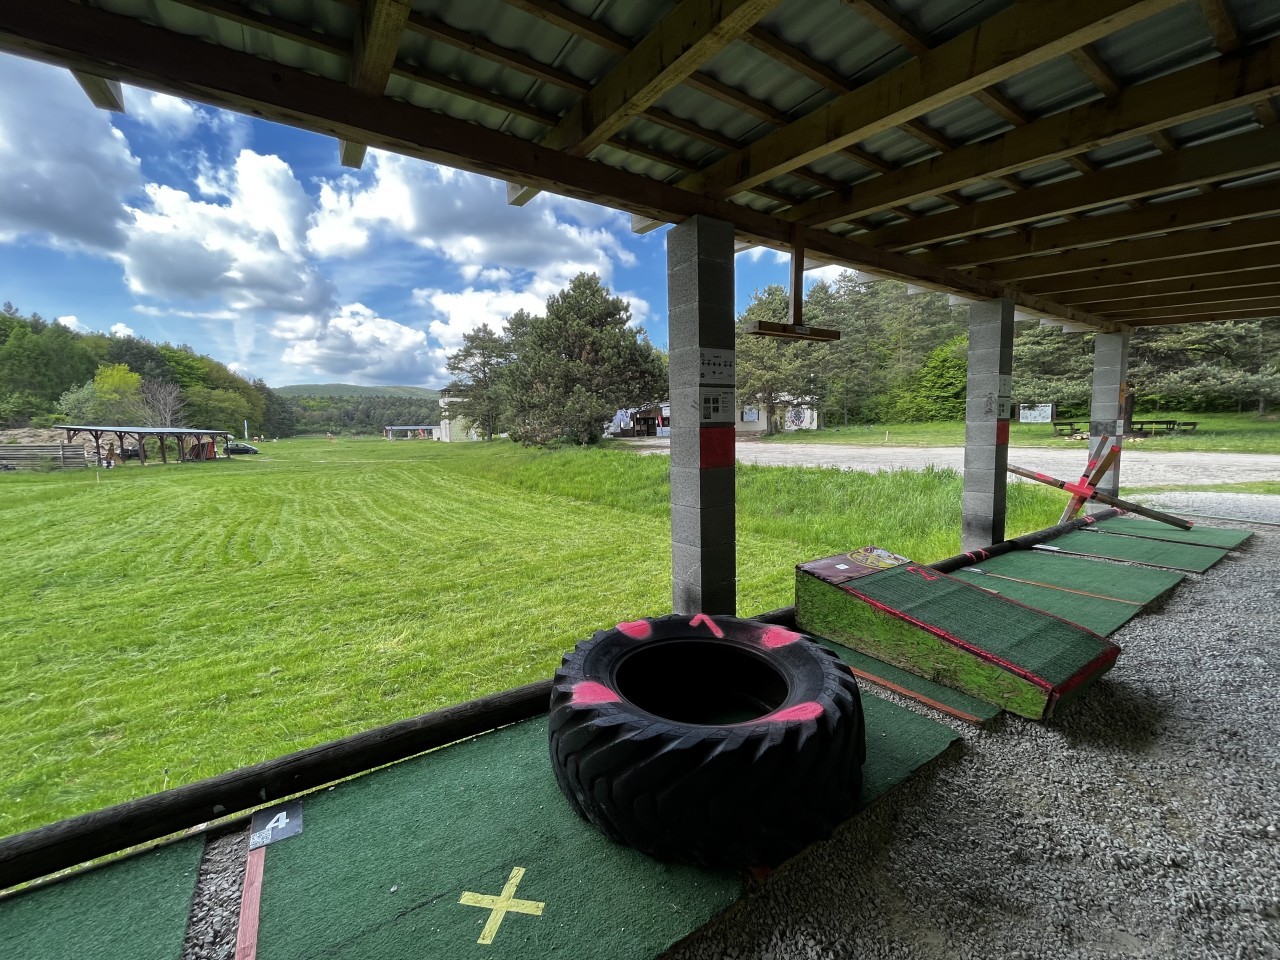 RENTAL OF SHOOTING RANGES AND EQUIPMENT